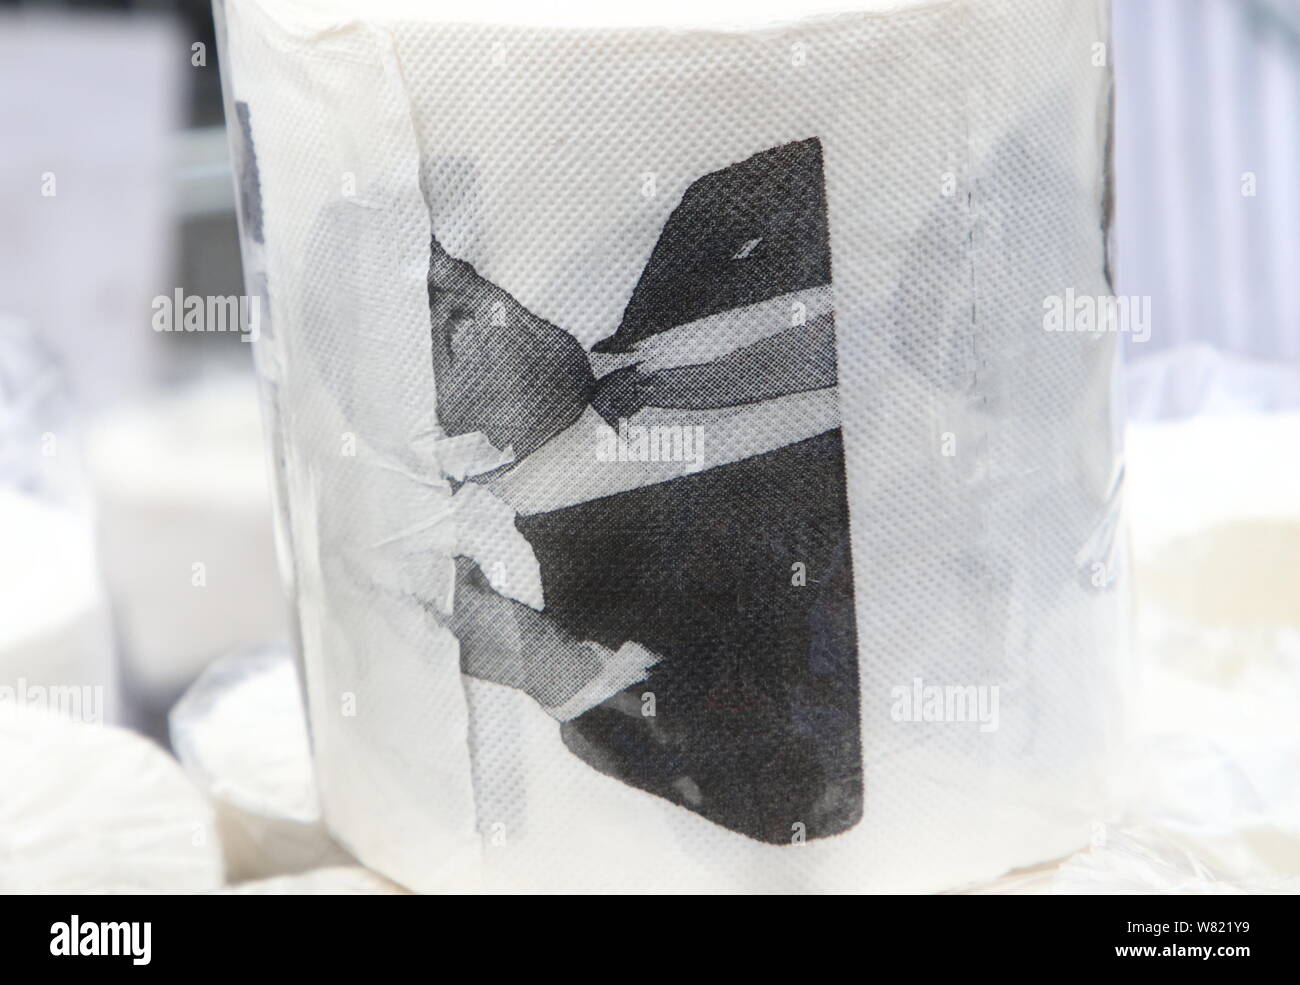 A view of President Trump Toilet Paper for sale in Westminster. Stock Photo